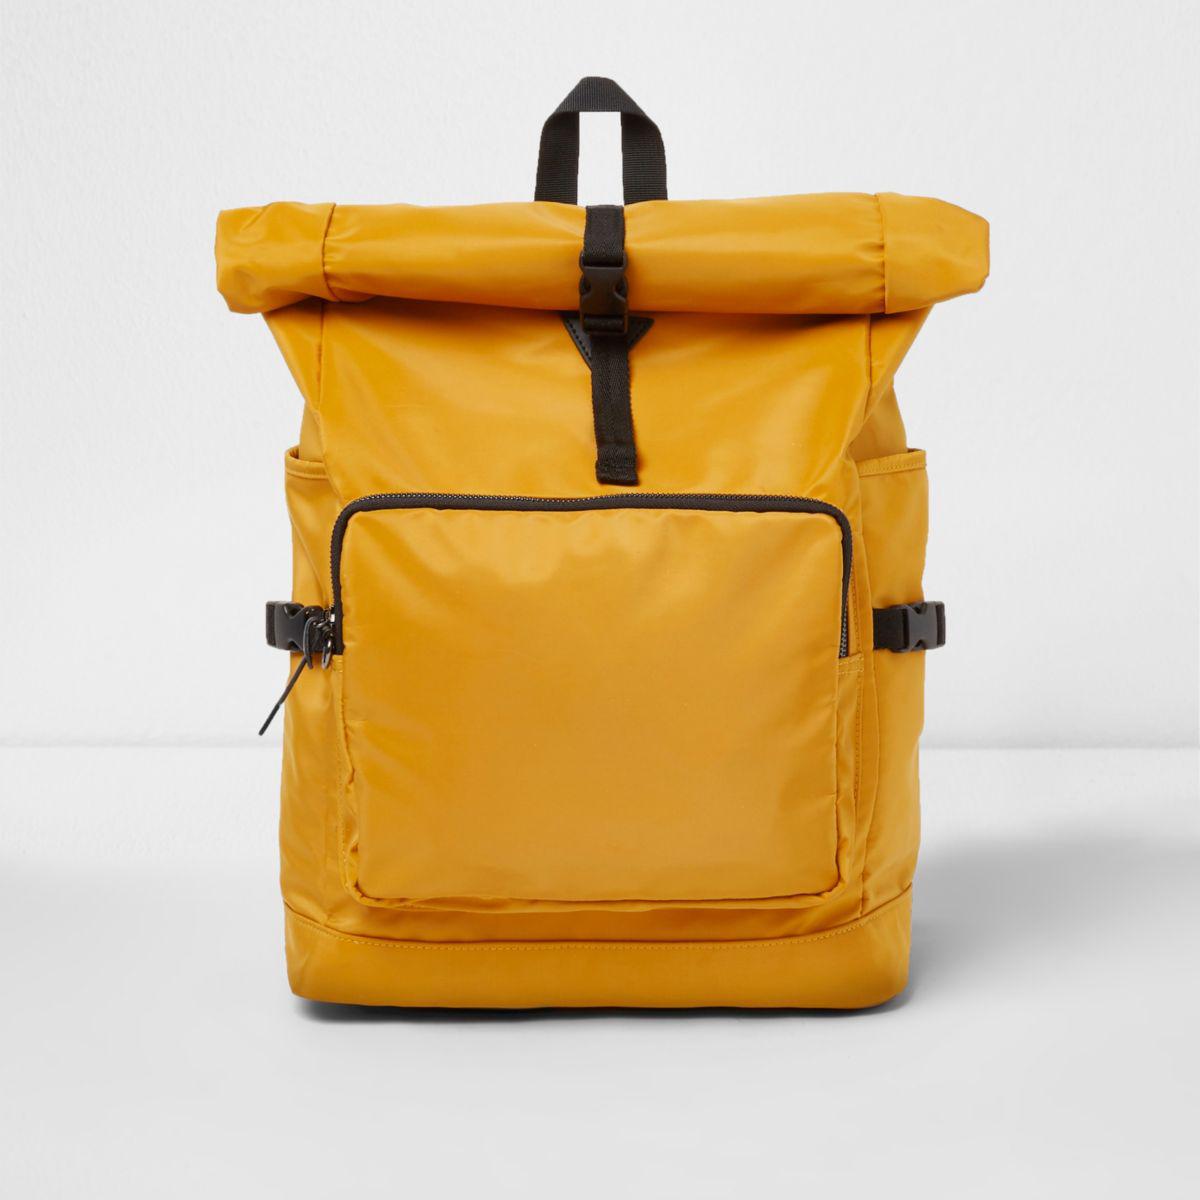 Lyst - River Island Yellow Roll Top Clip Backpack Yellow Roll Top Clip ...